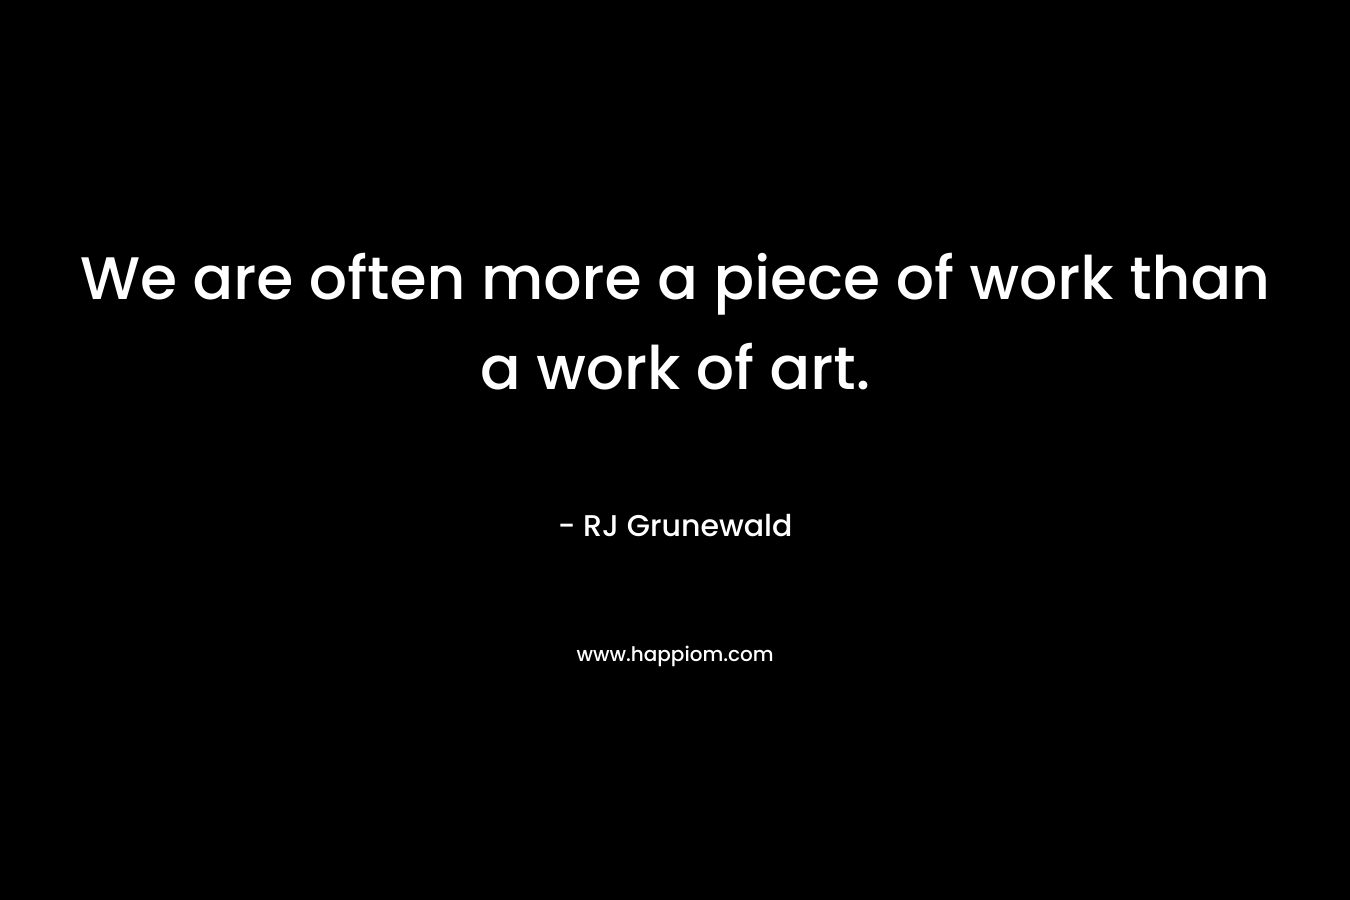 We are often more a piece of work than a work of art.